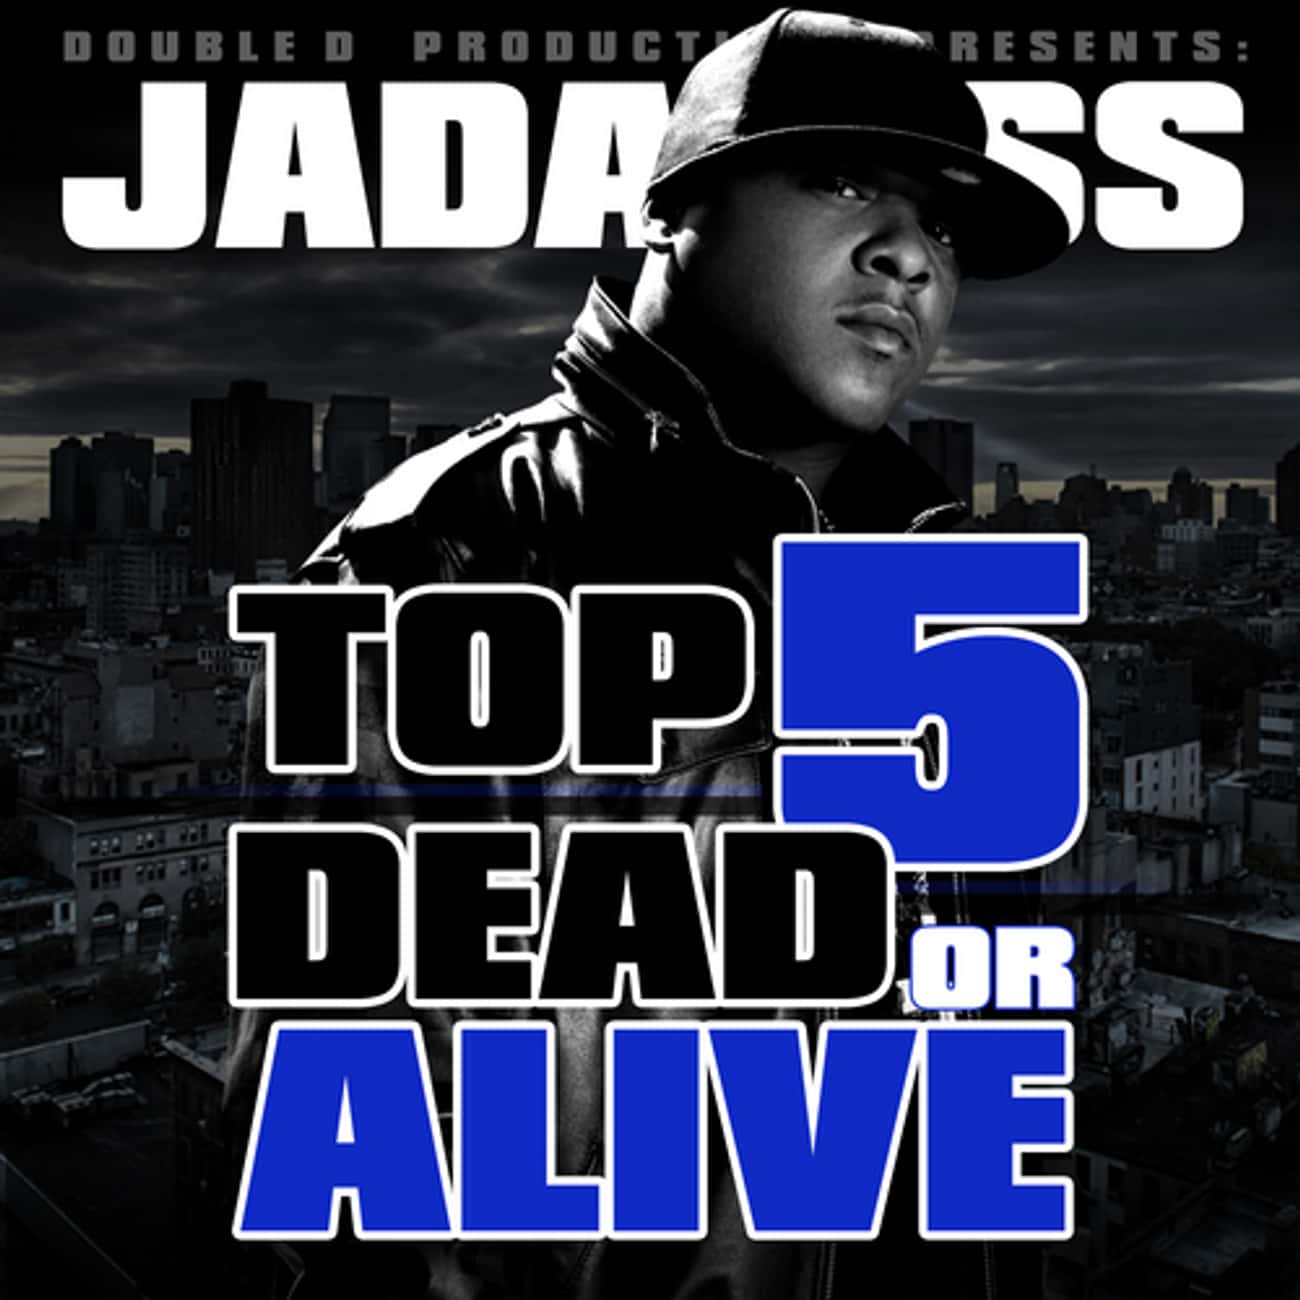 The Best Jadakiss Albums Ranked By Fans 5604